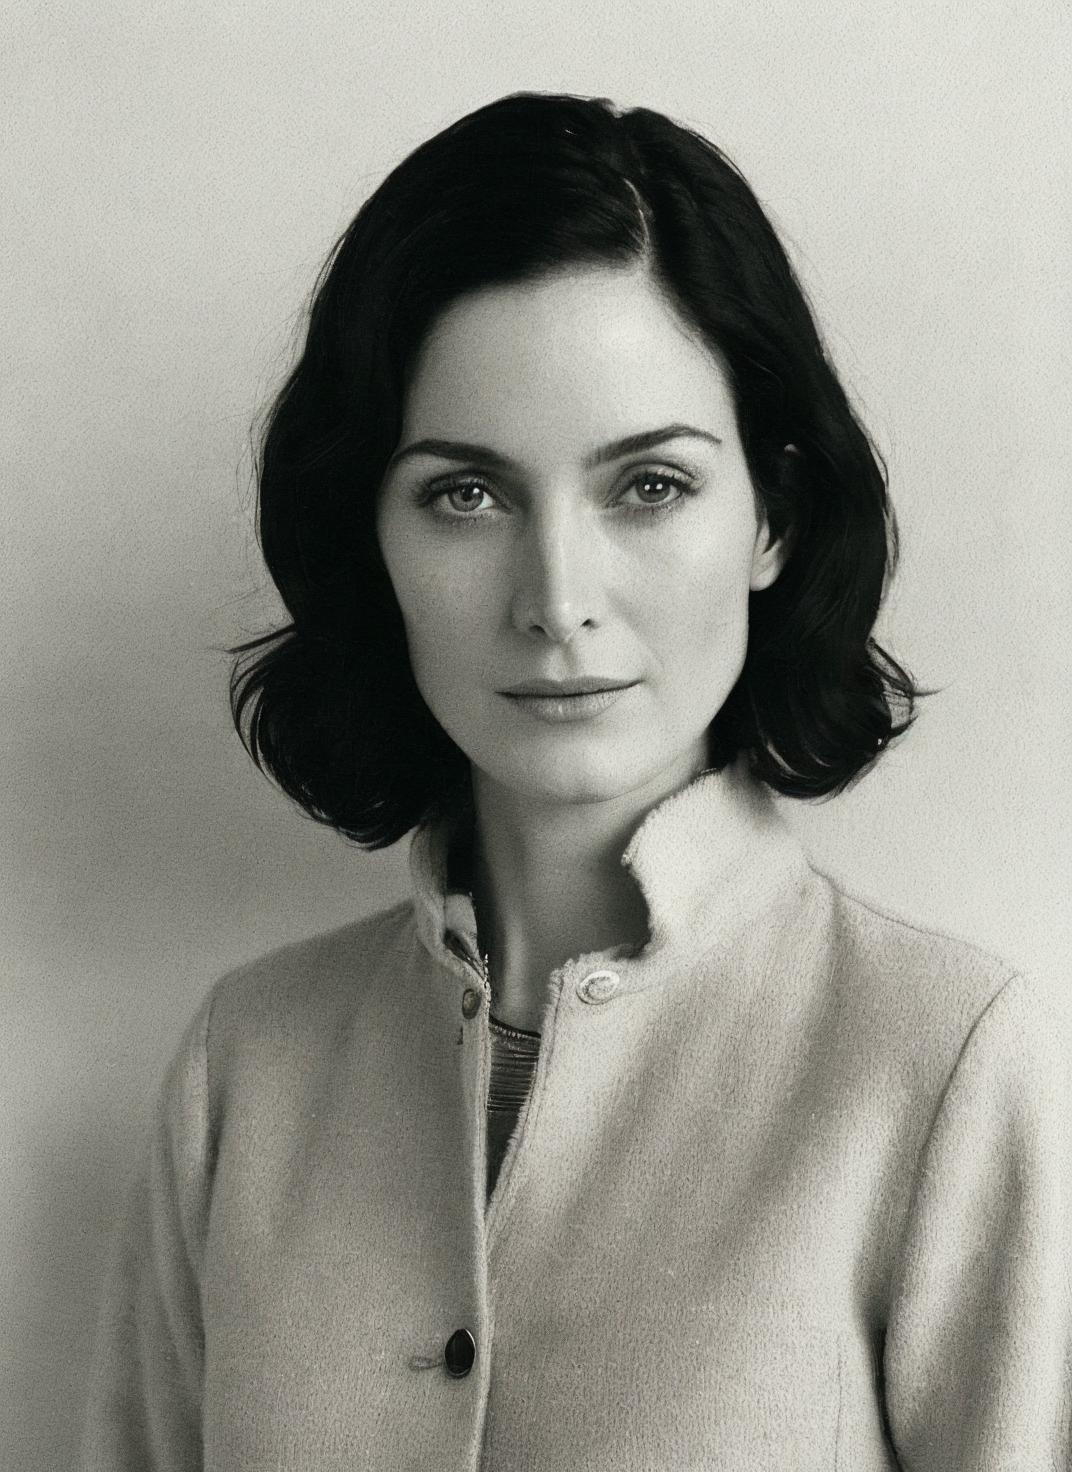 Carrie-Anne Moss image by malcolmrey